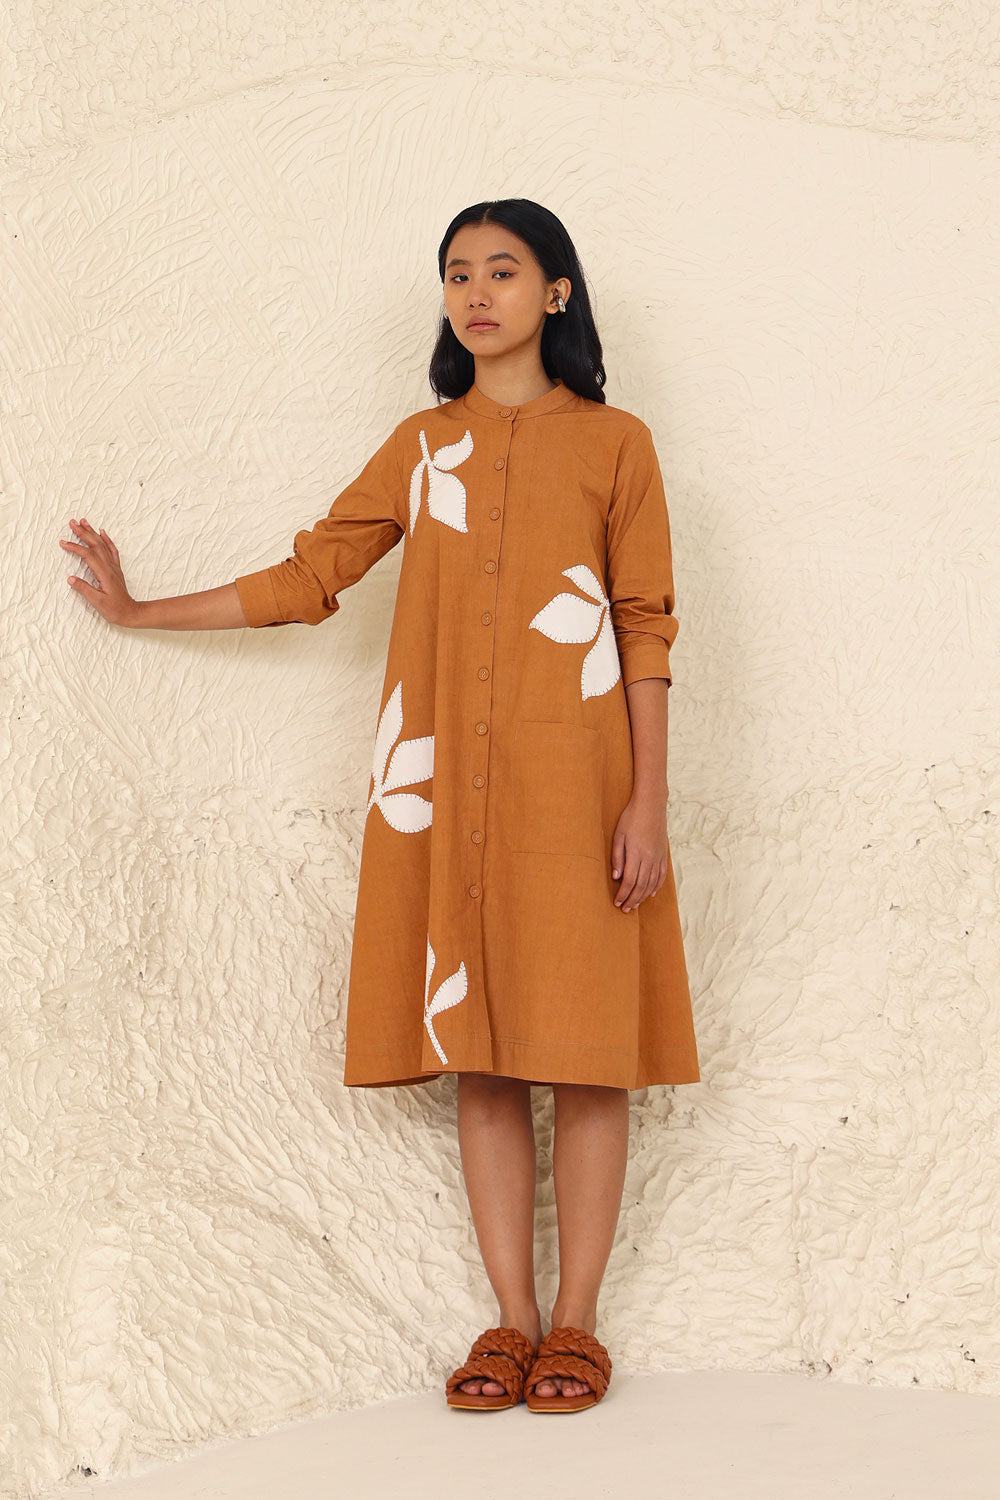 Orange Solid Midi Dress at Kamakhyaa by Kanelle. This item is Cotton Poplin, Evening Wear, Floral, Made from Natural Materials, Midi Dresses, One by One by Kanelle, Orange, Regular Fit